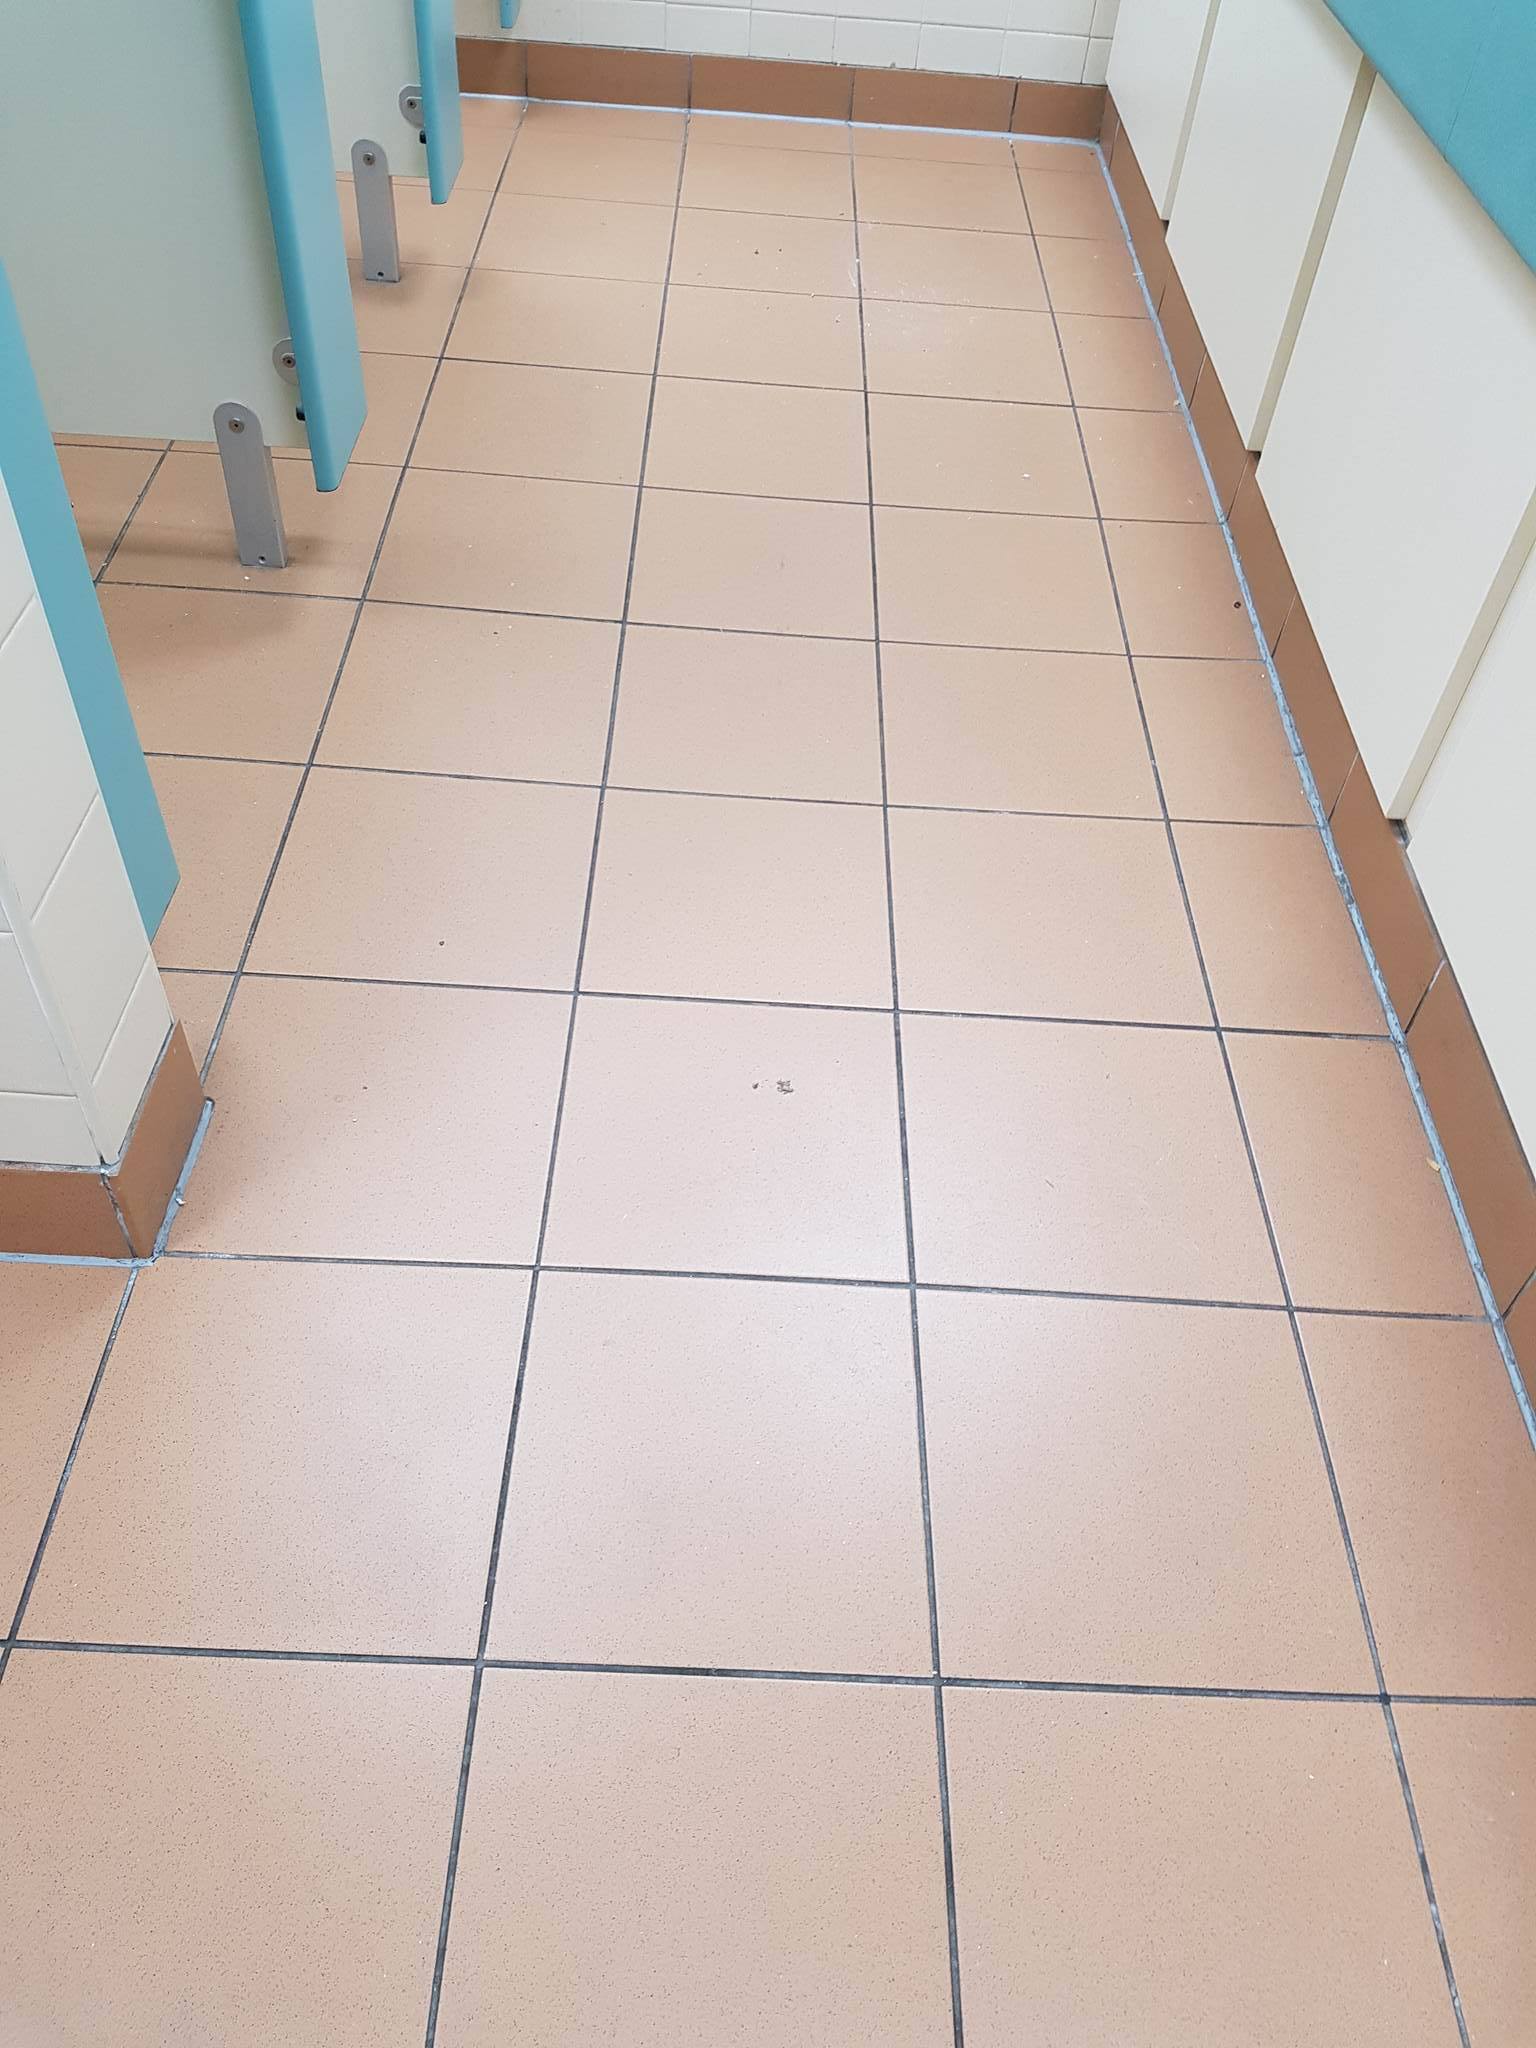 Manchester commercial tile and grout cleaning